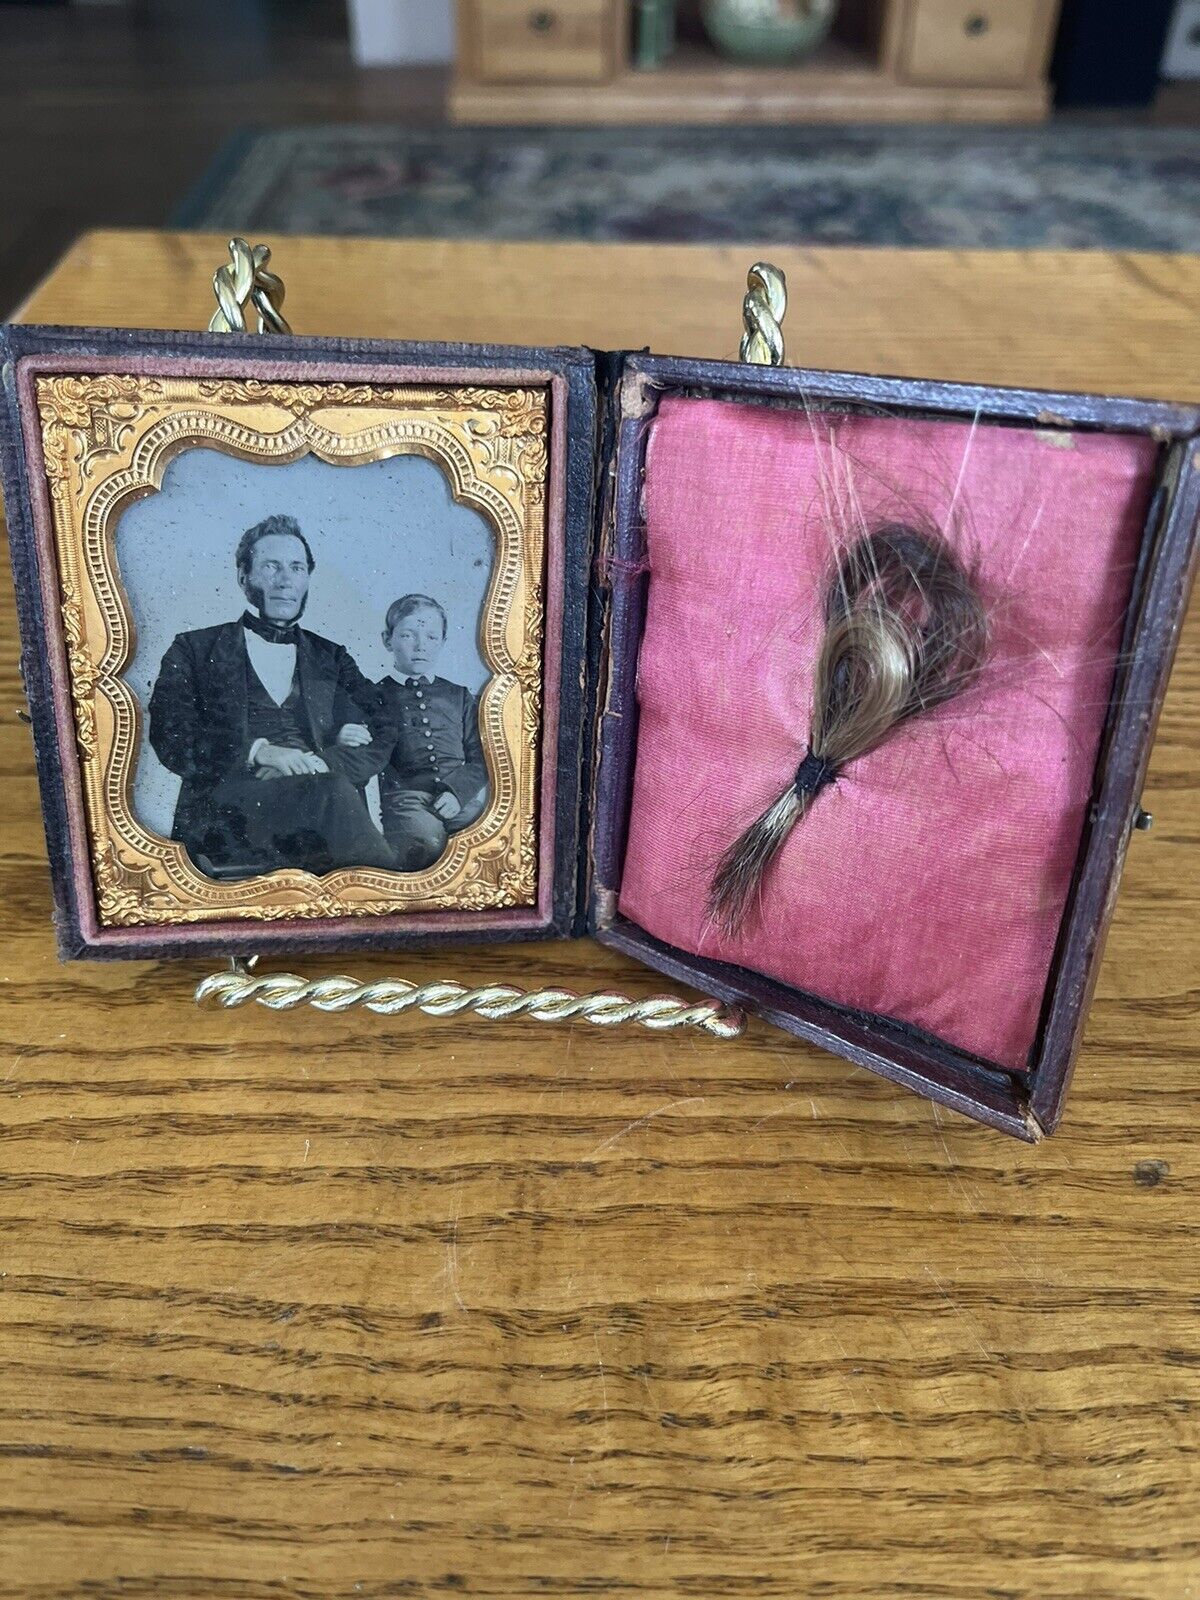 Daguerreotype Father And Son Remembrance Photo With Hair Of Each.